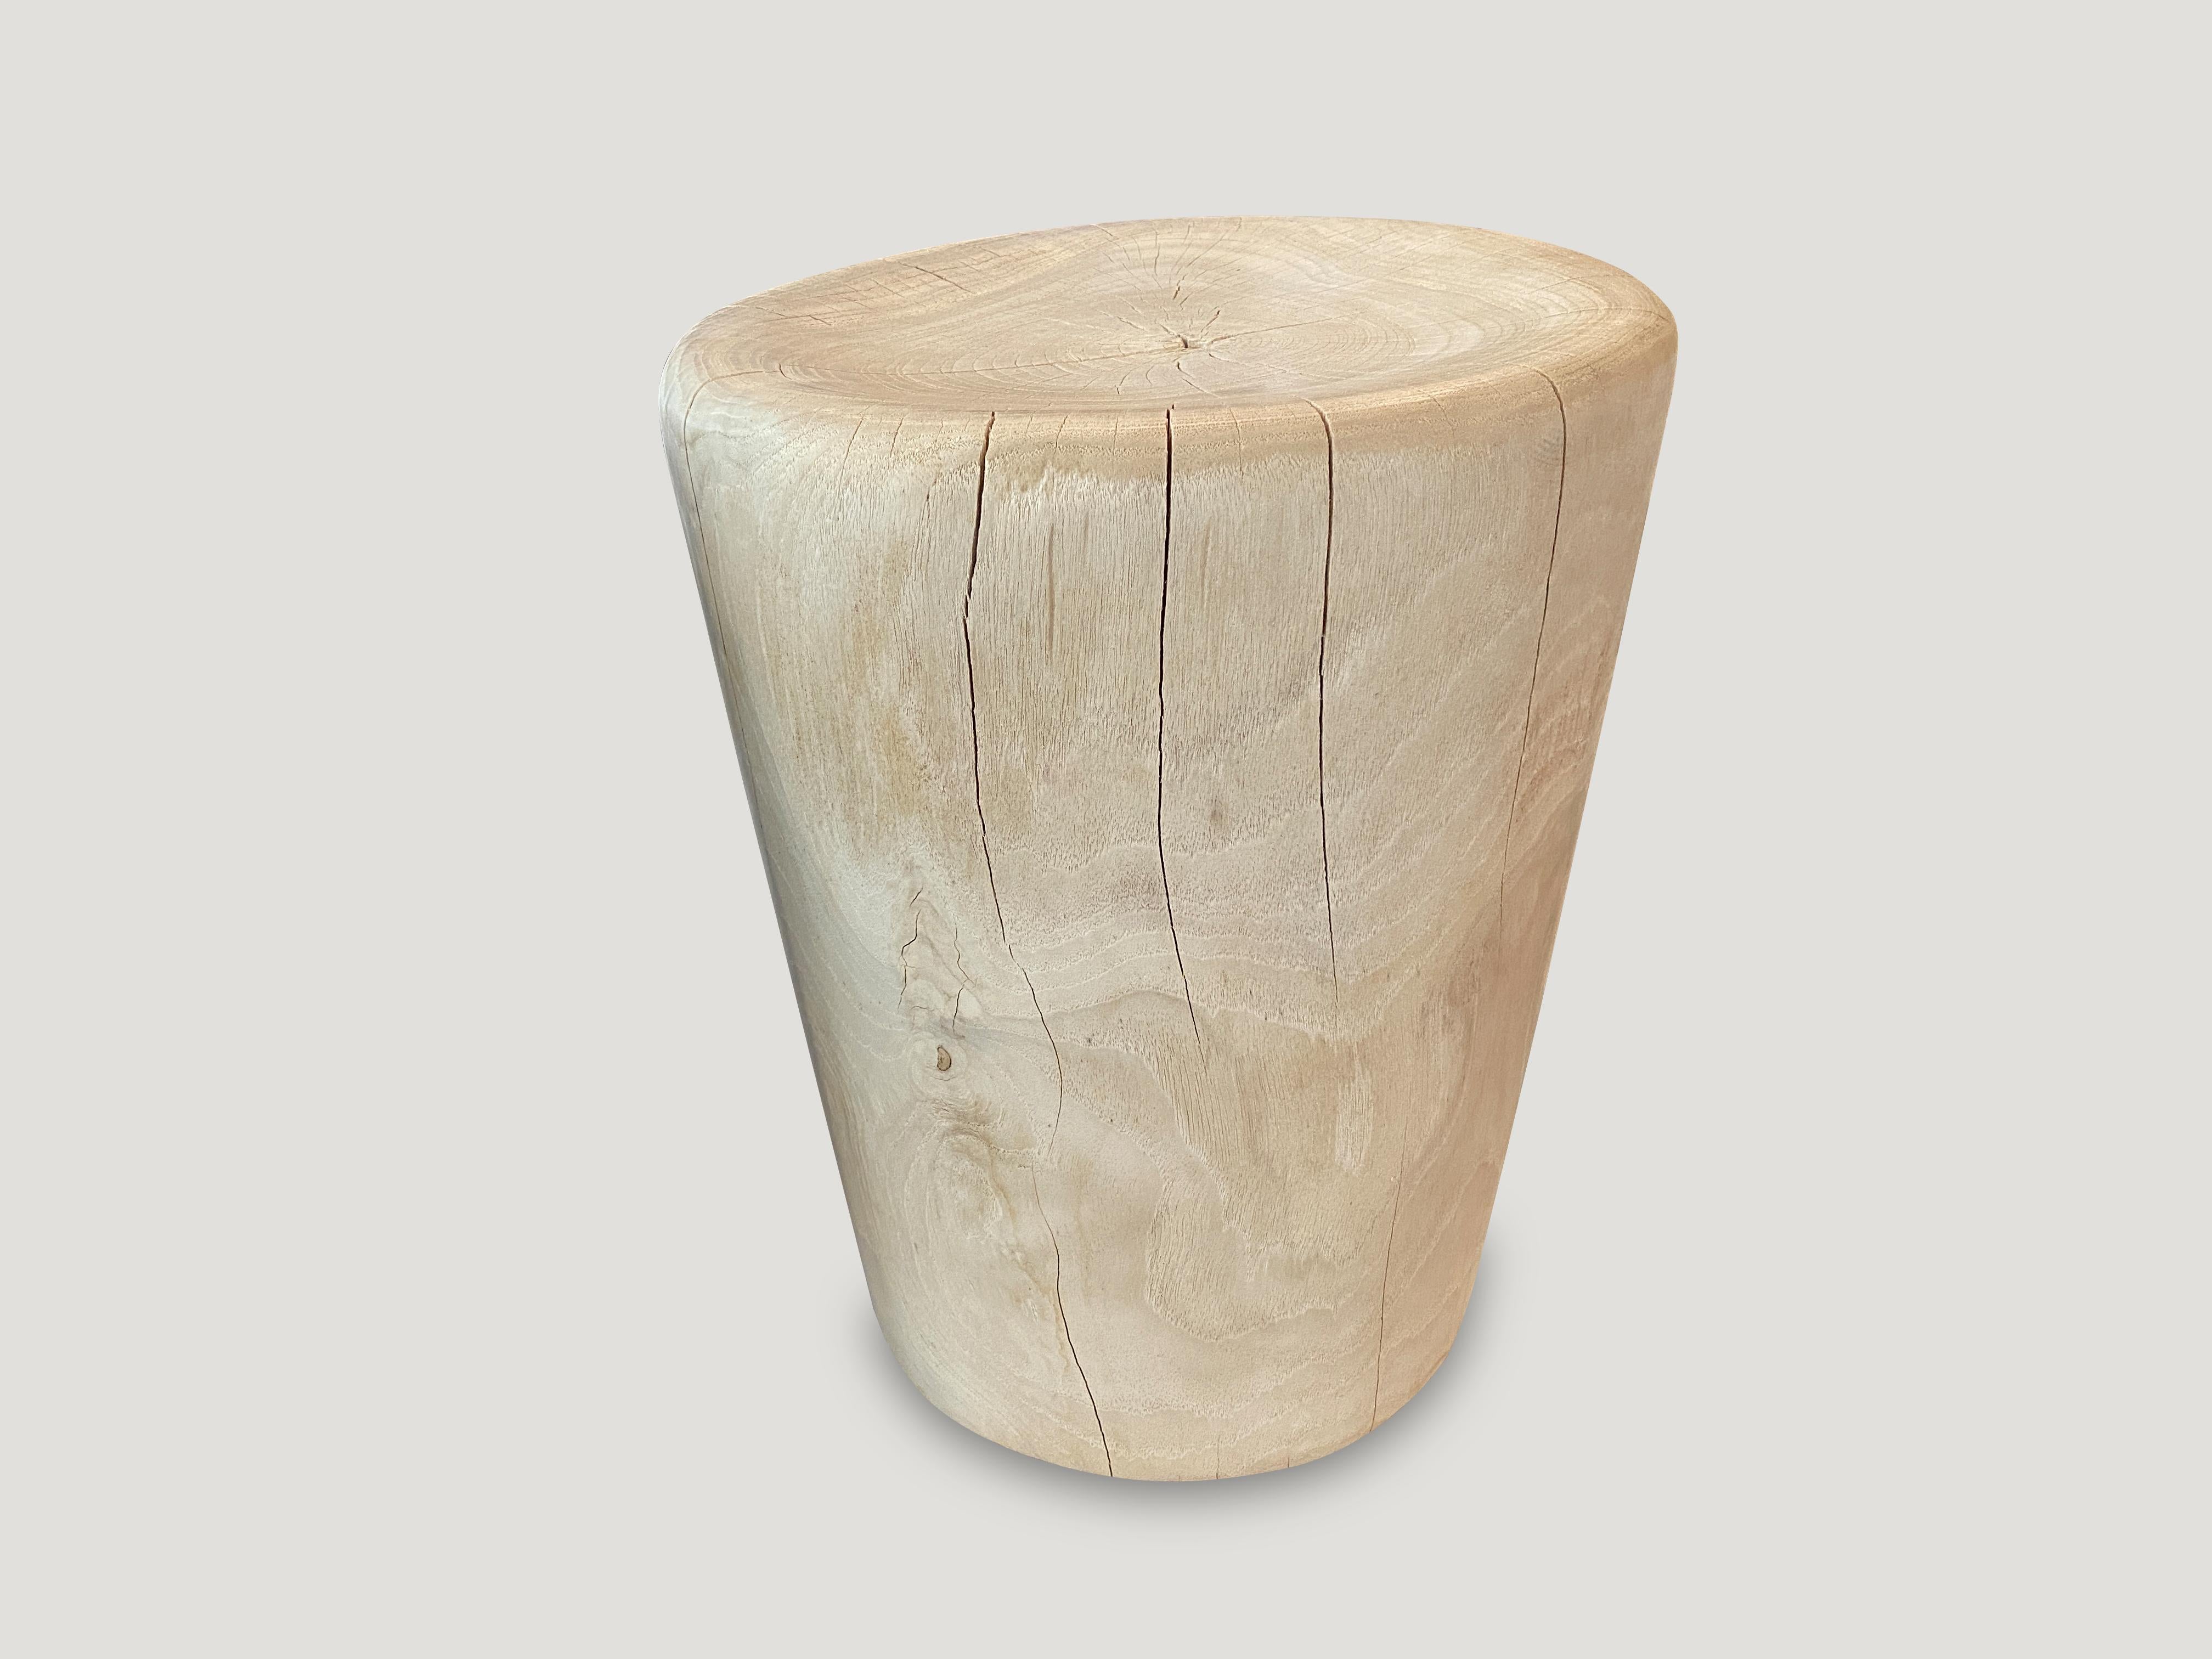 Reclaimed teak wood side table or stool. Hand carved into a drum shape whilst respecting the natural organic wood. Bleached to a bone finish. We have a collection. All unique. The price reflects the one shown. Also available charred.

The St.